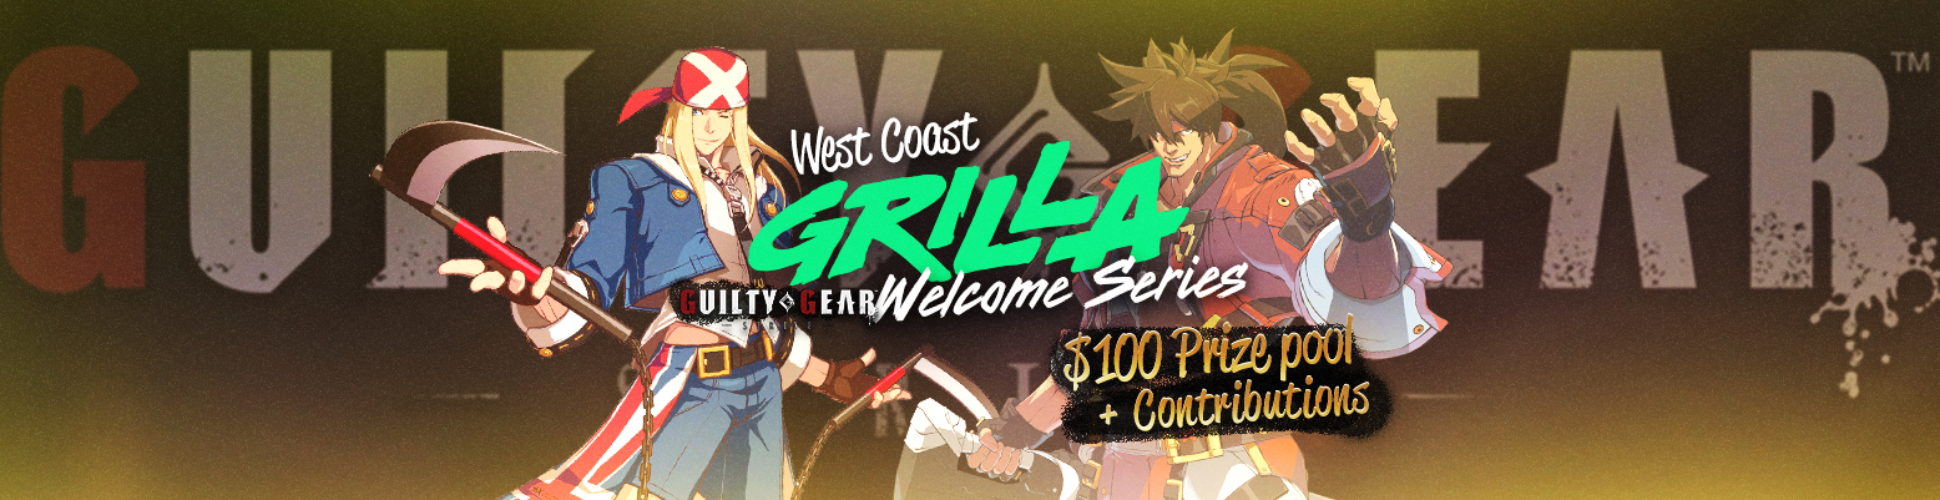 Grilla's Welcome Series, Part II (West Coast) PC